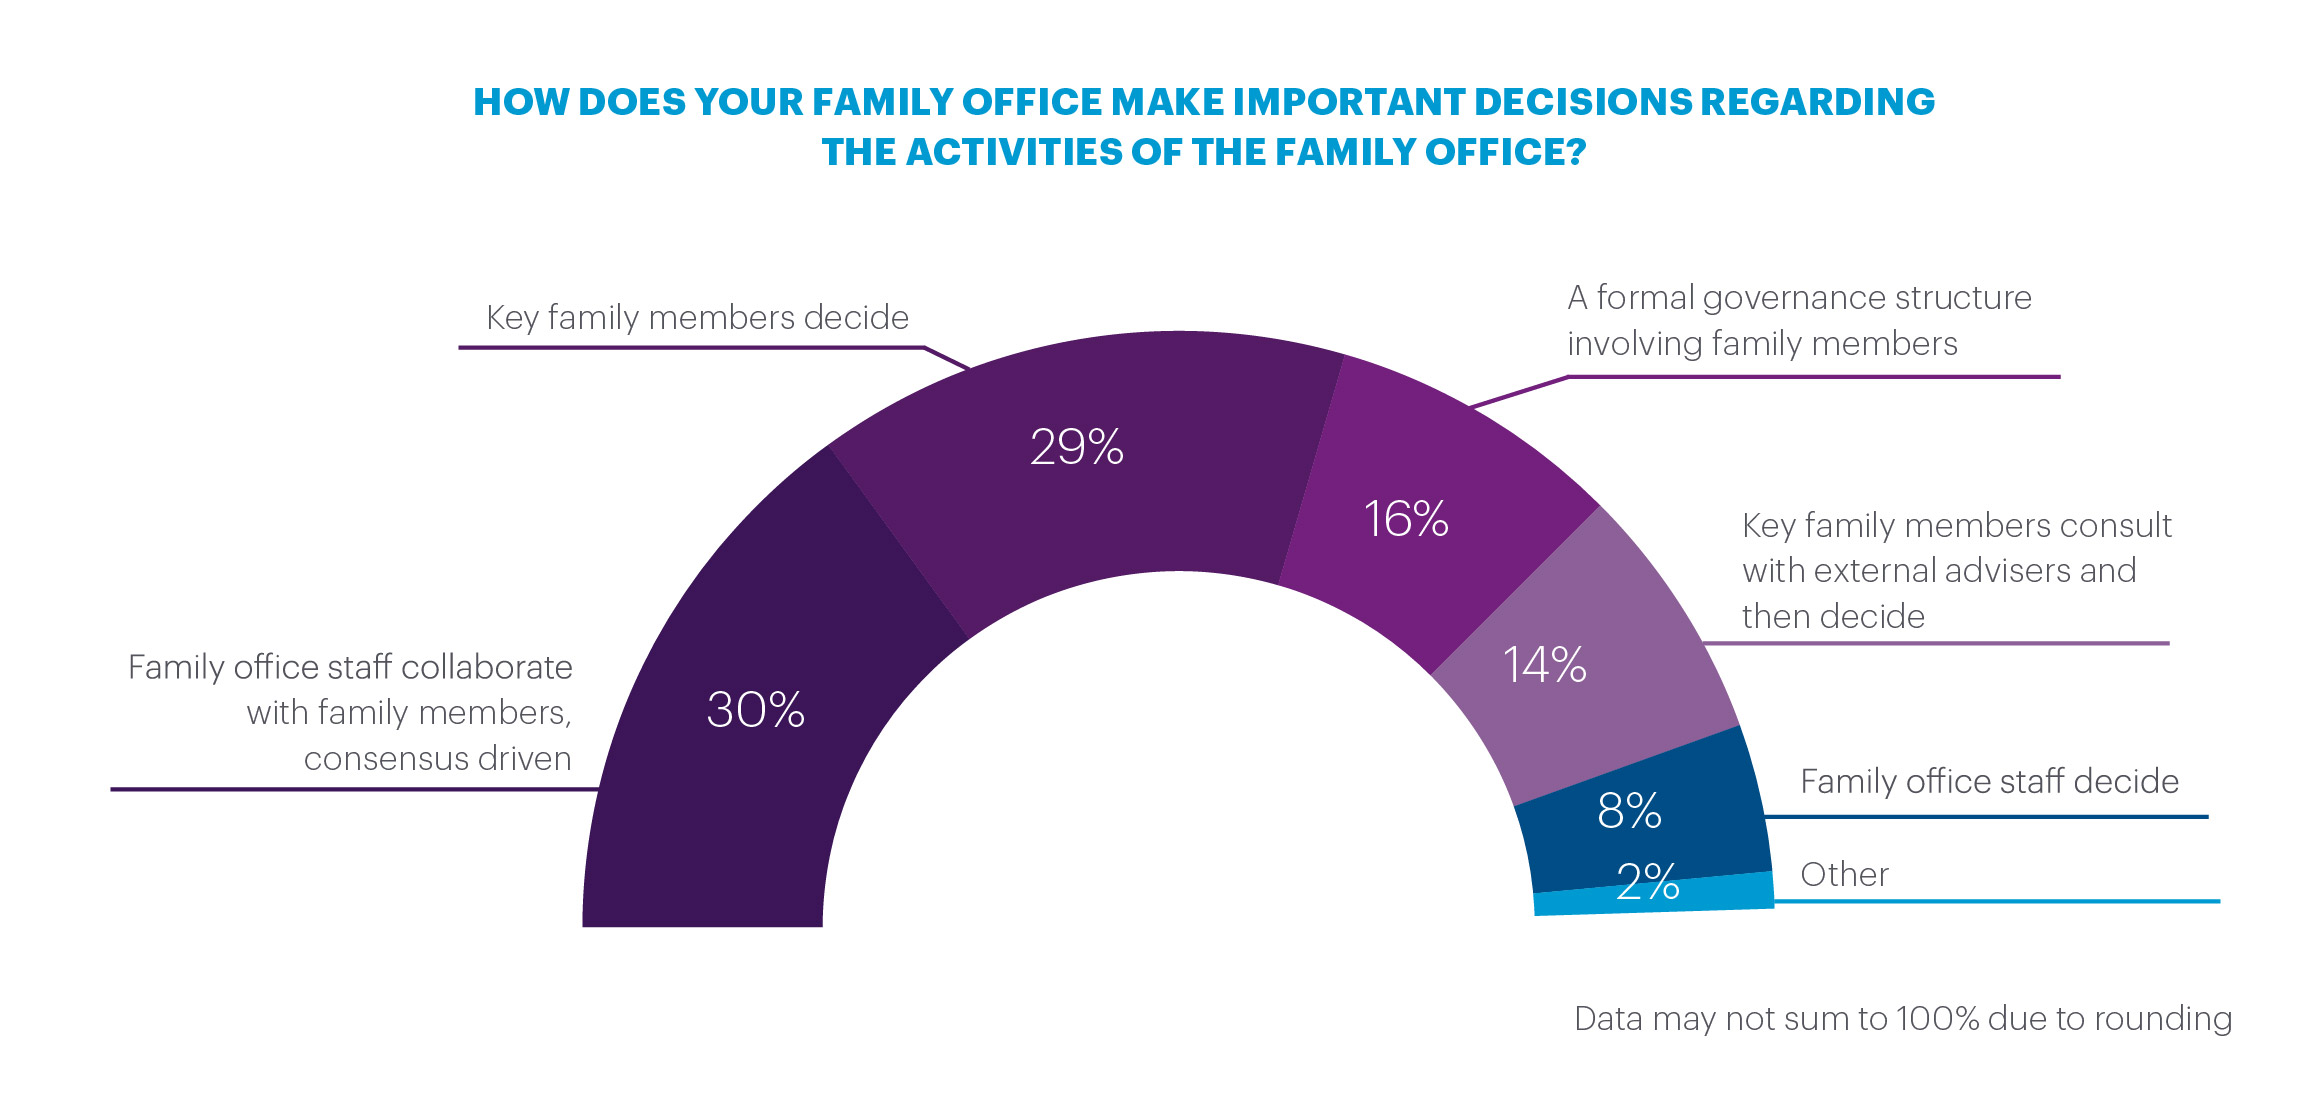 Percentage and explanation on how important family office decisions are made